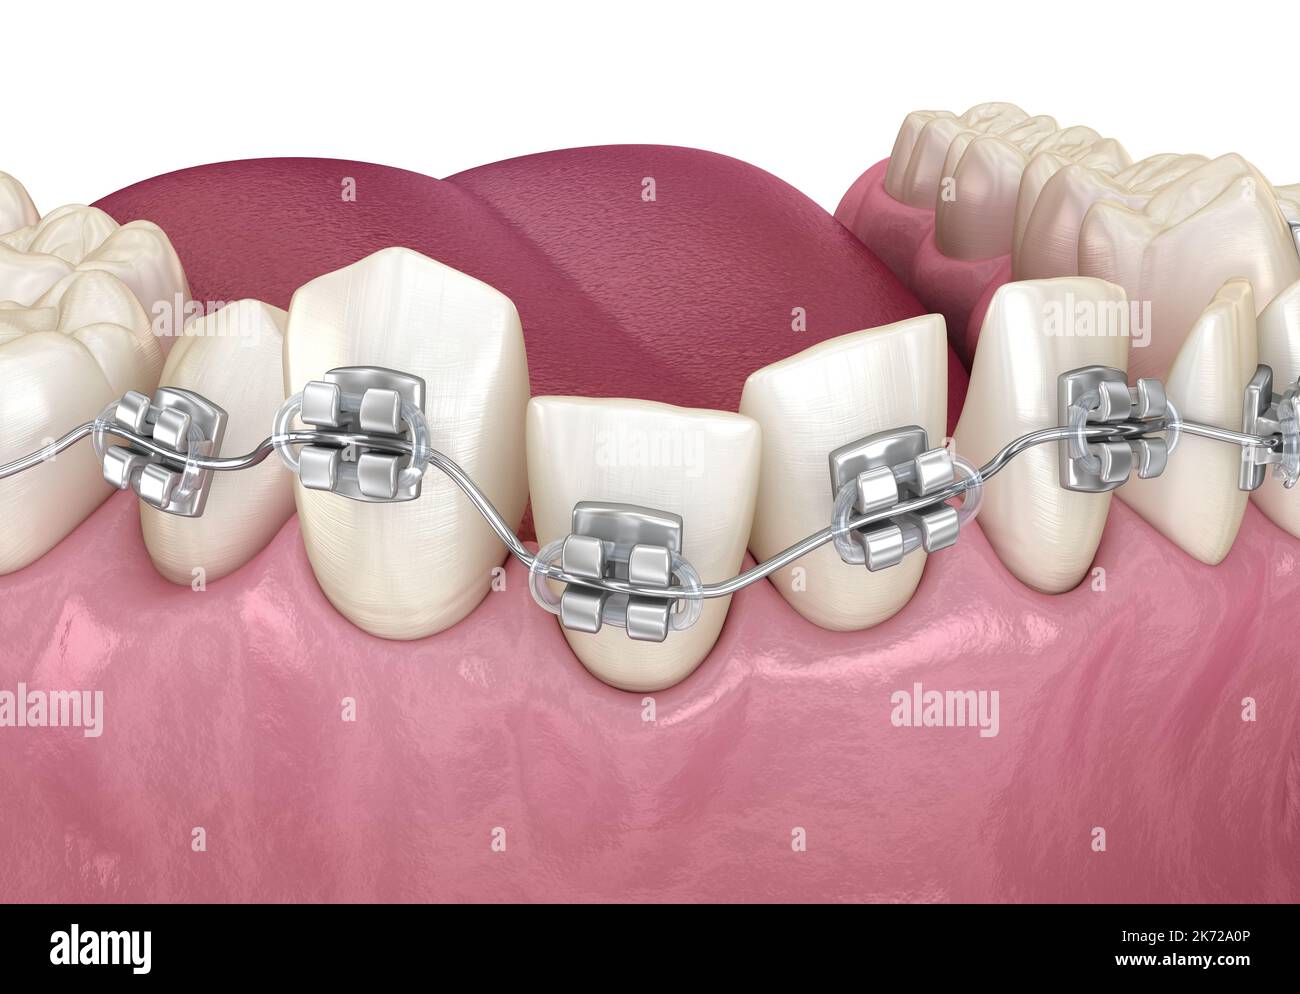 Abnormal teeth position and Clear braces tretament. Medically accurate dental 3D illustration Stock Photo